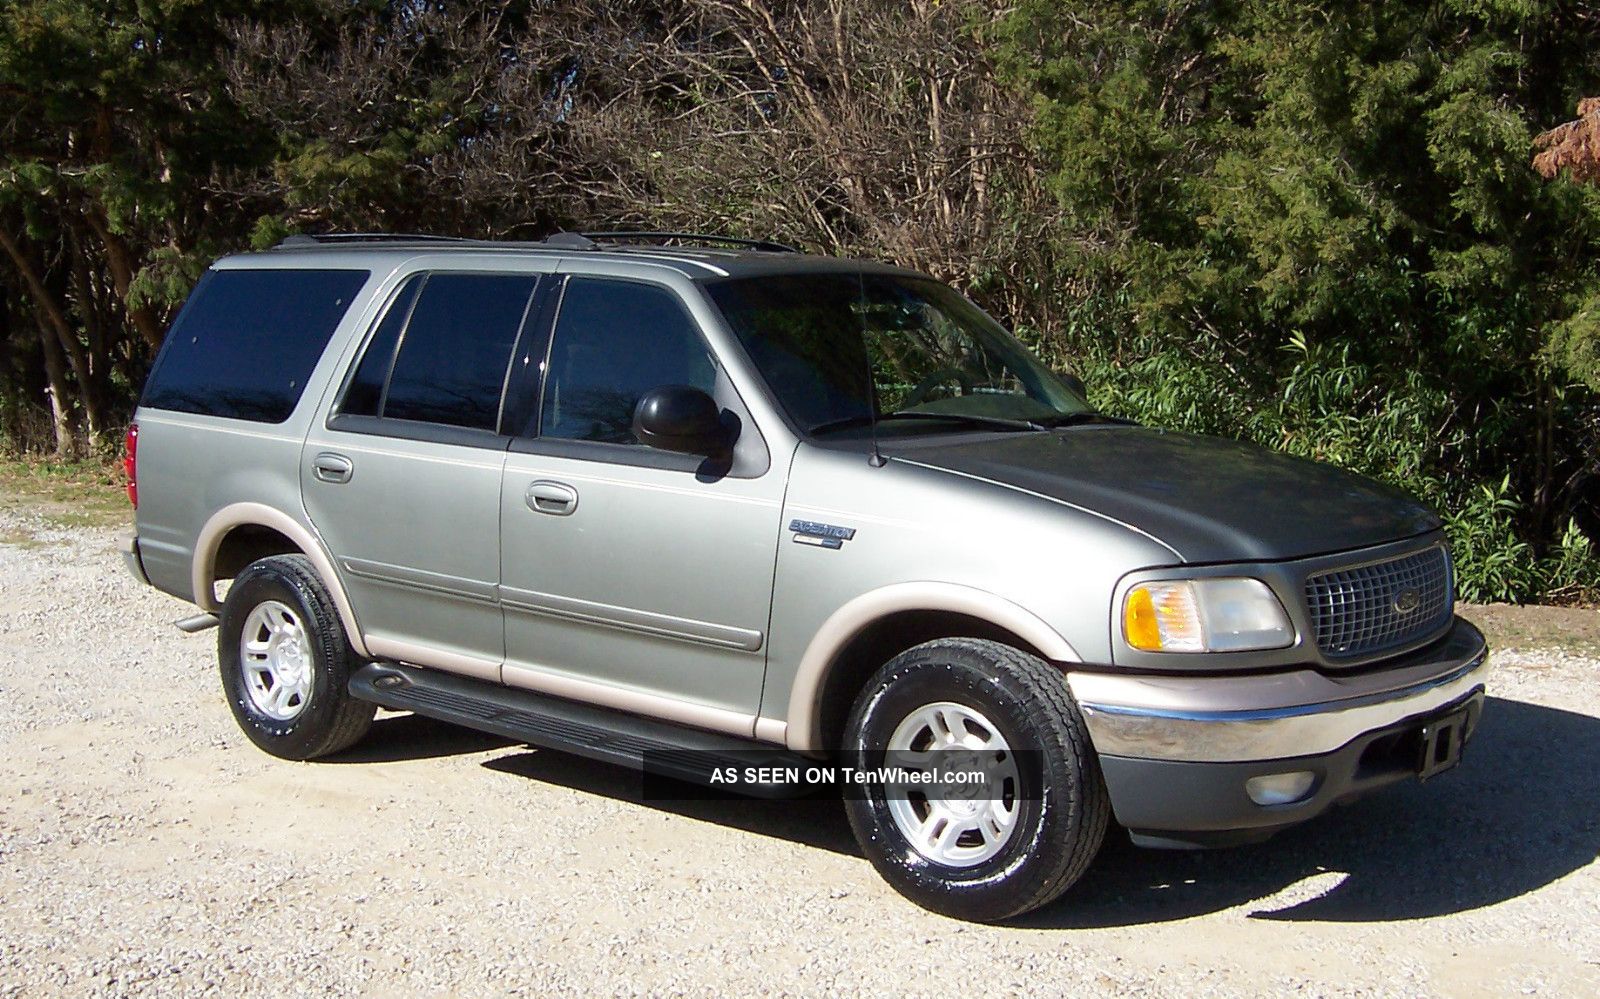 1999 Ford expedition eddie bauer edition reviews #2